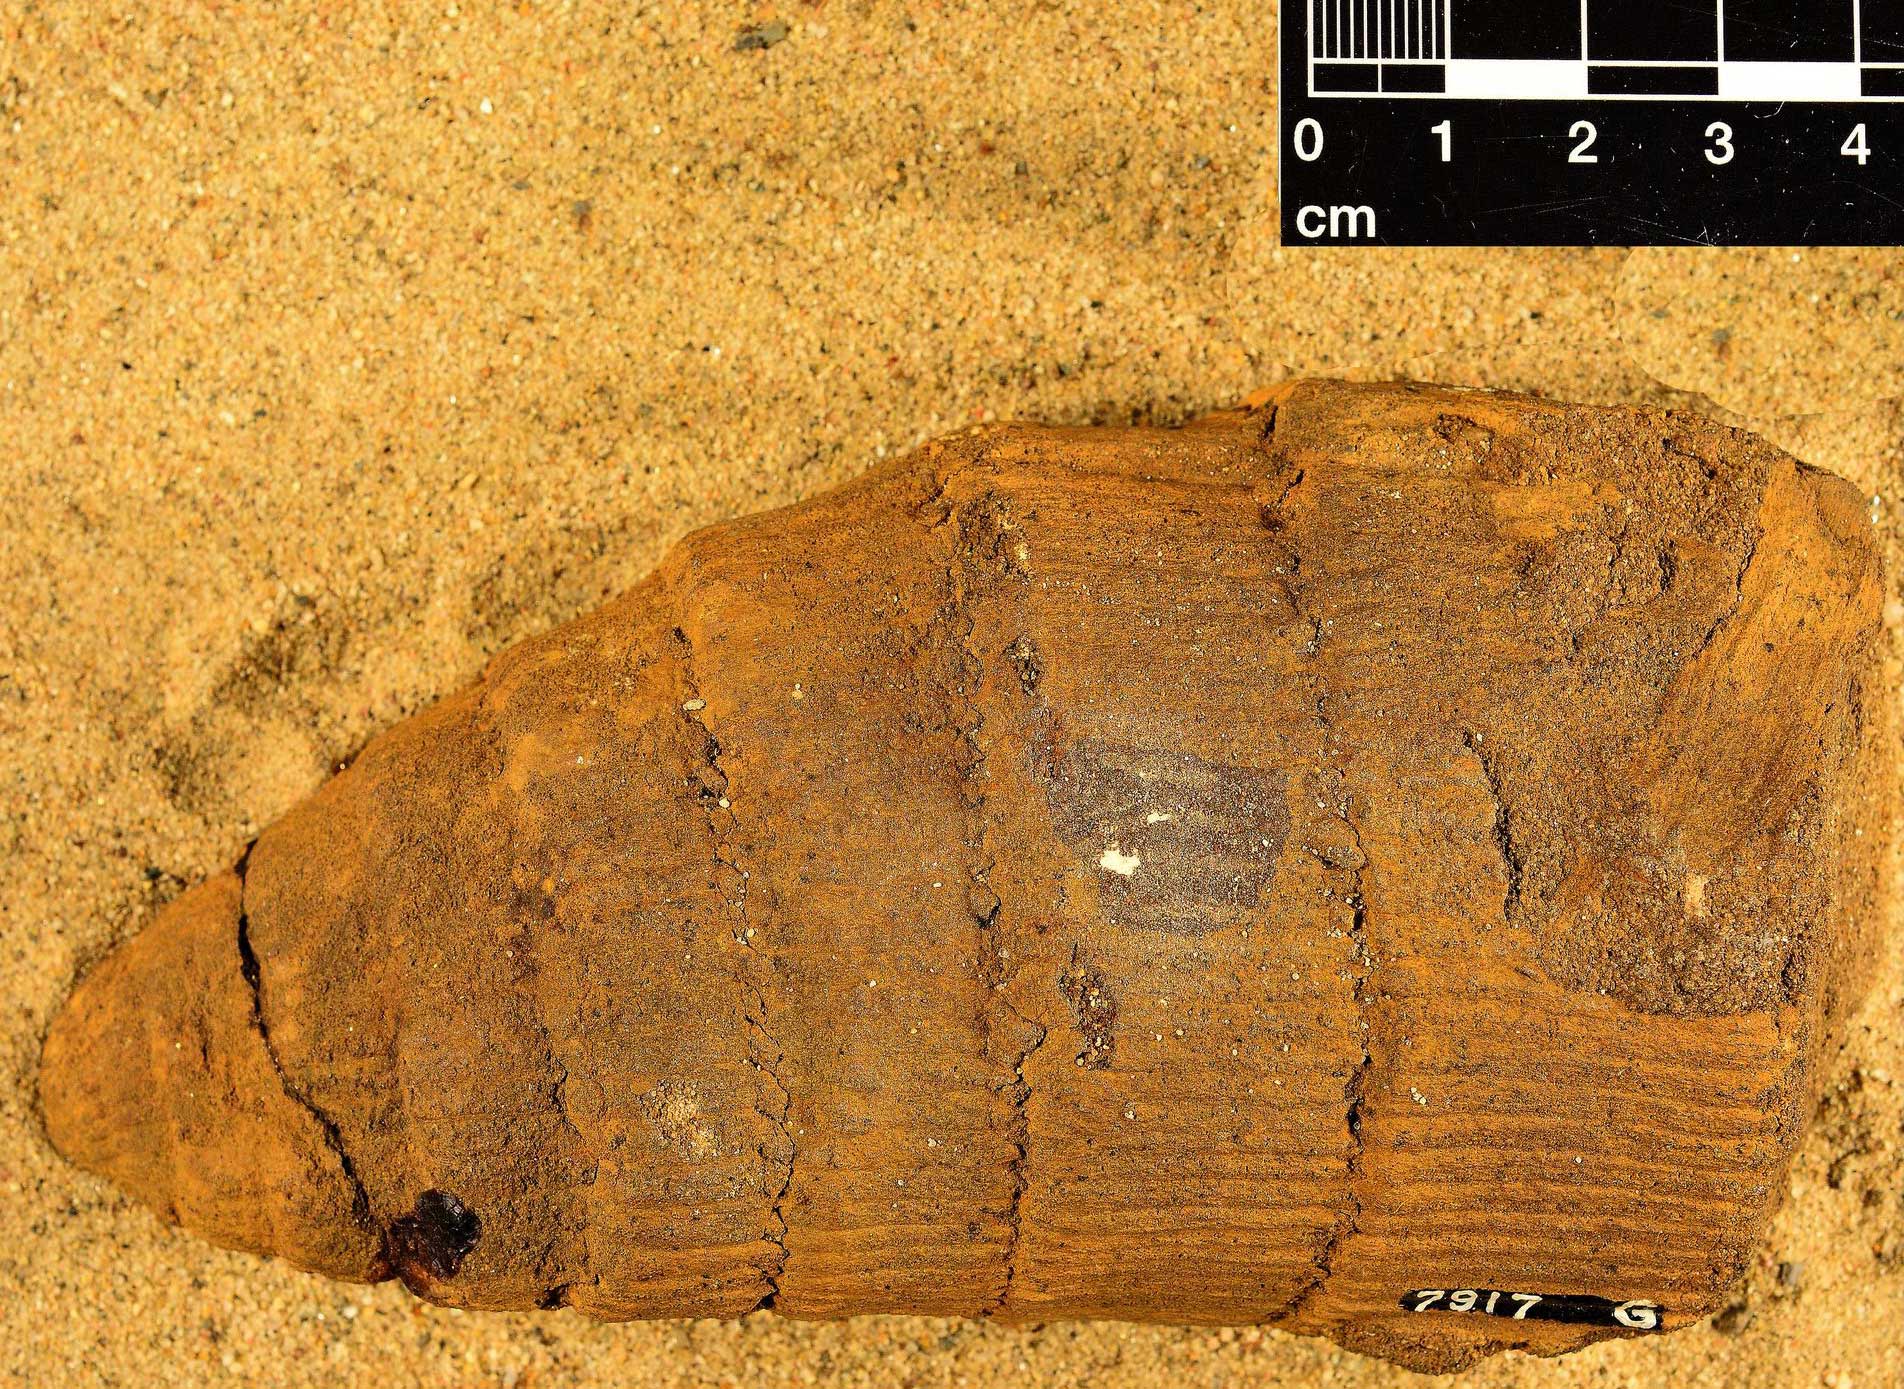 Photograph of Calamites, a portion of a stem, from the Carboniferous of Ohio. The photo shows the tapered end of a stem. The stem has horizontal furrows at increasing intervals from the tip and longitudinal ridges and furrows that are closely spaced.